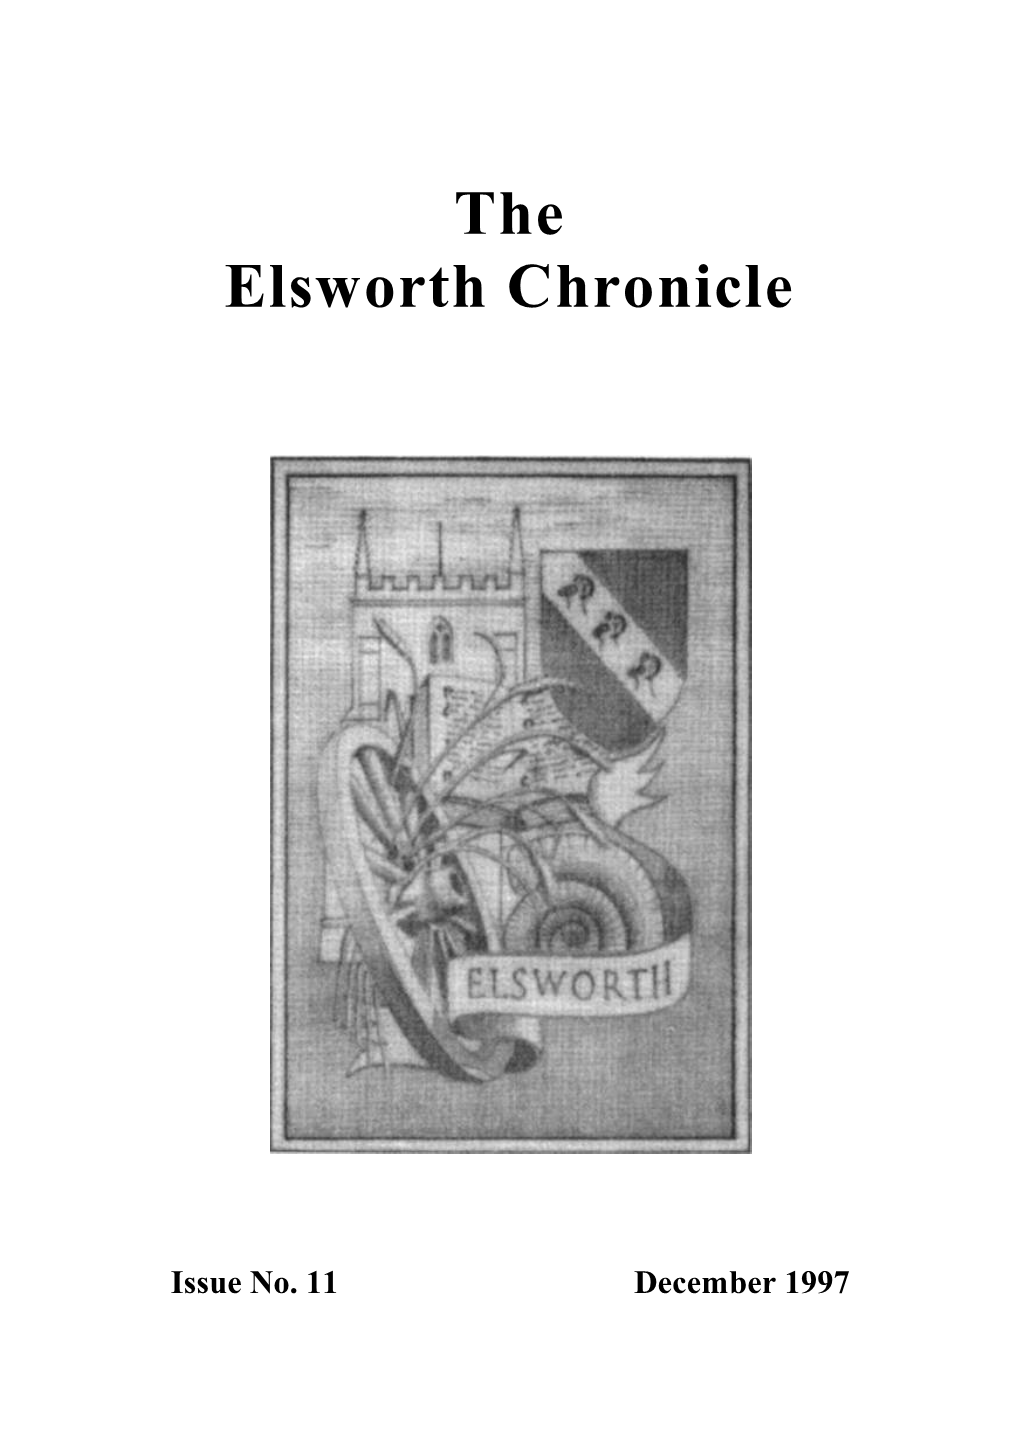 The Elsworth Chronicle